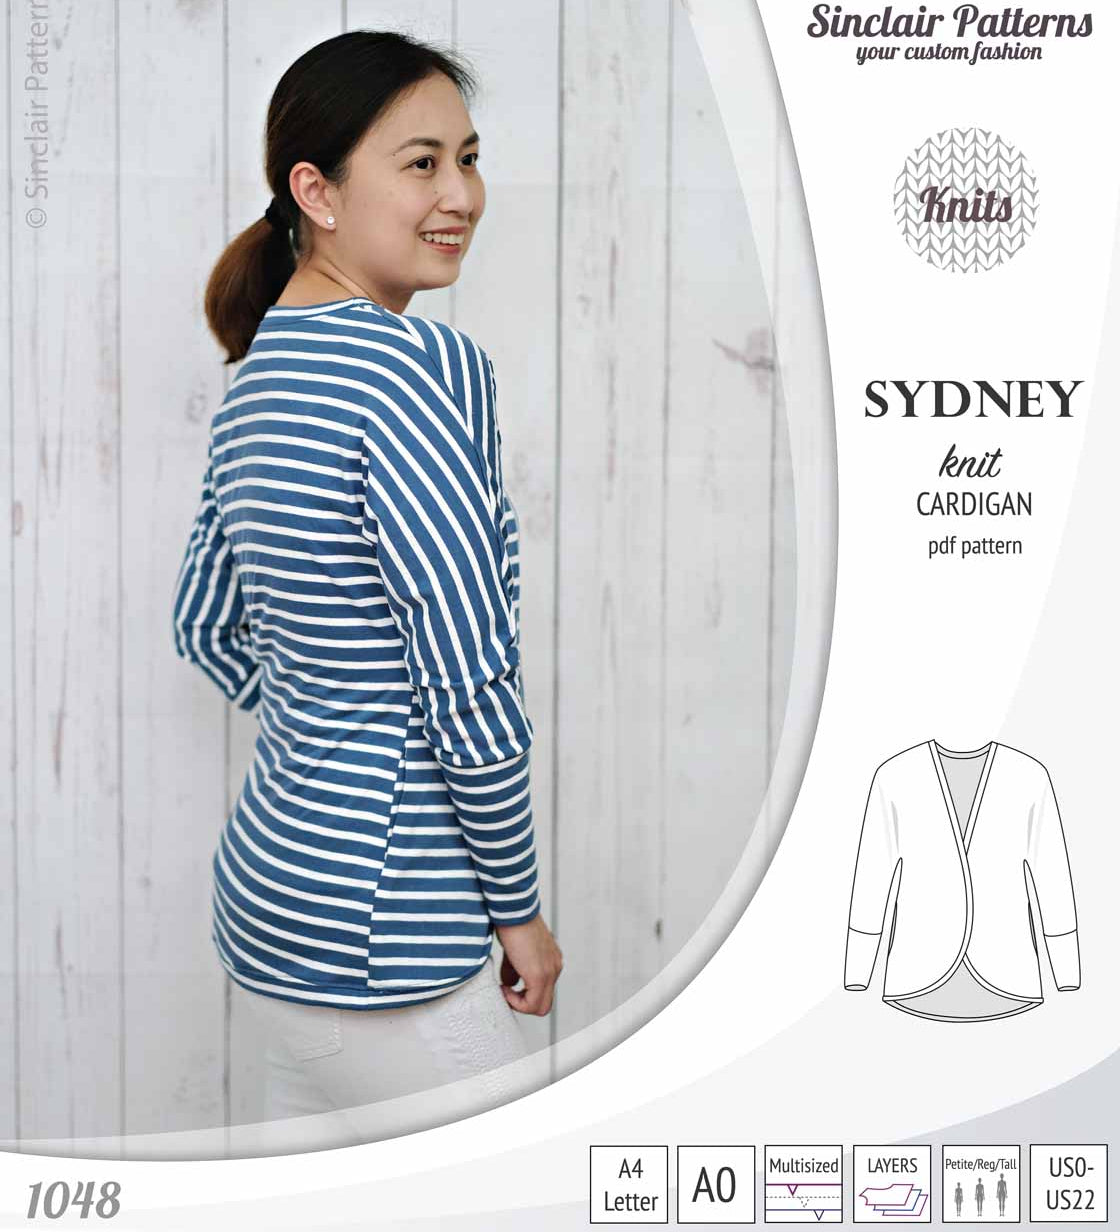 PDF Sewing pattern Sinclair Patterns S1048 Sydney cocoon style knit cardigan with pockets